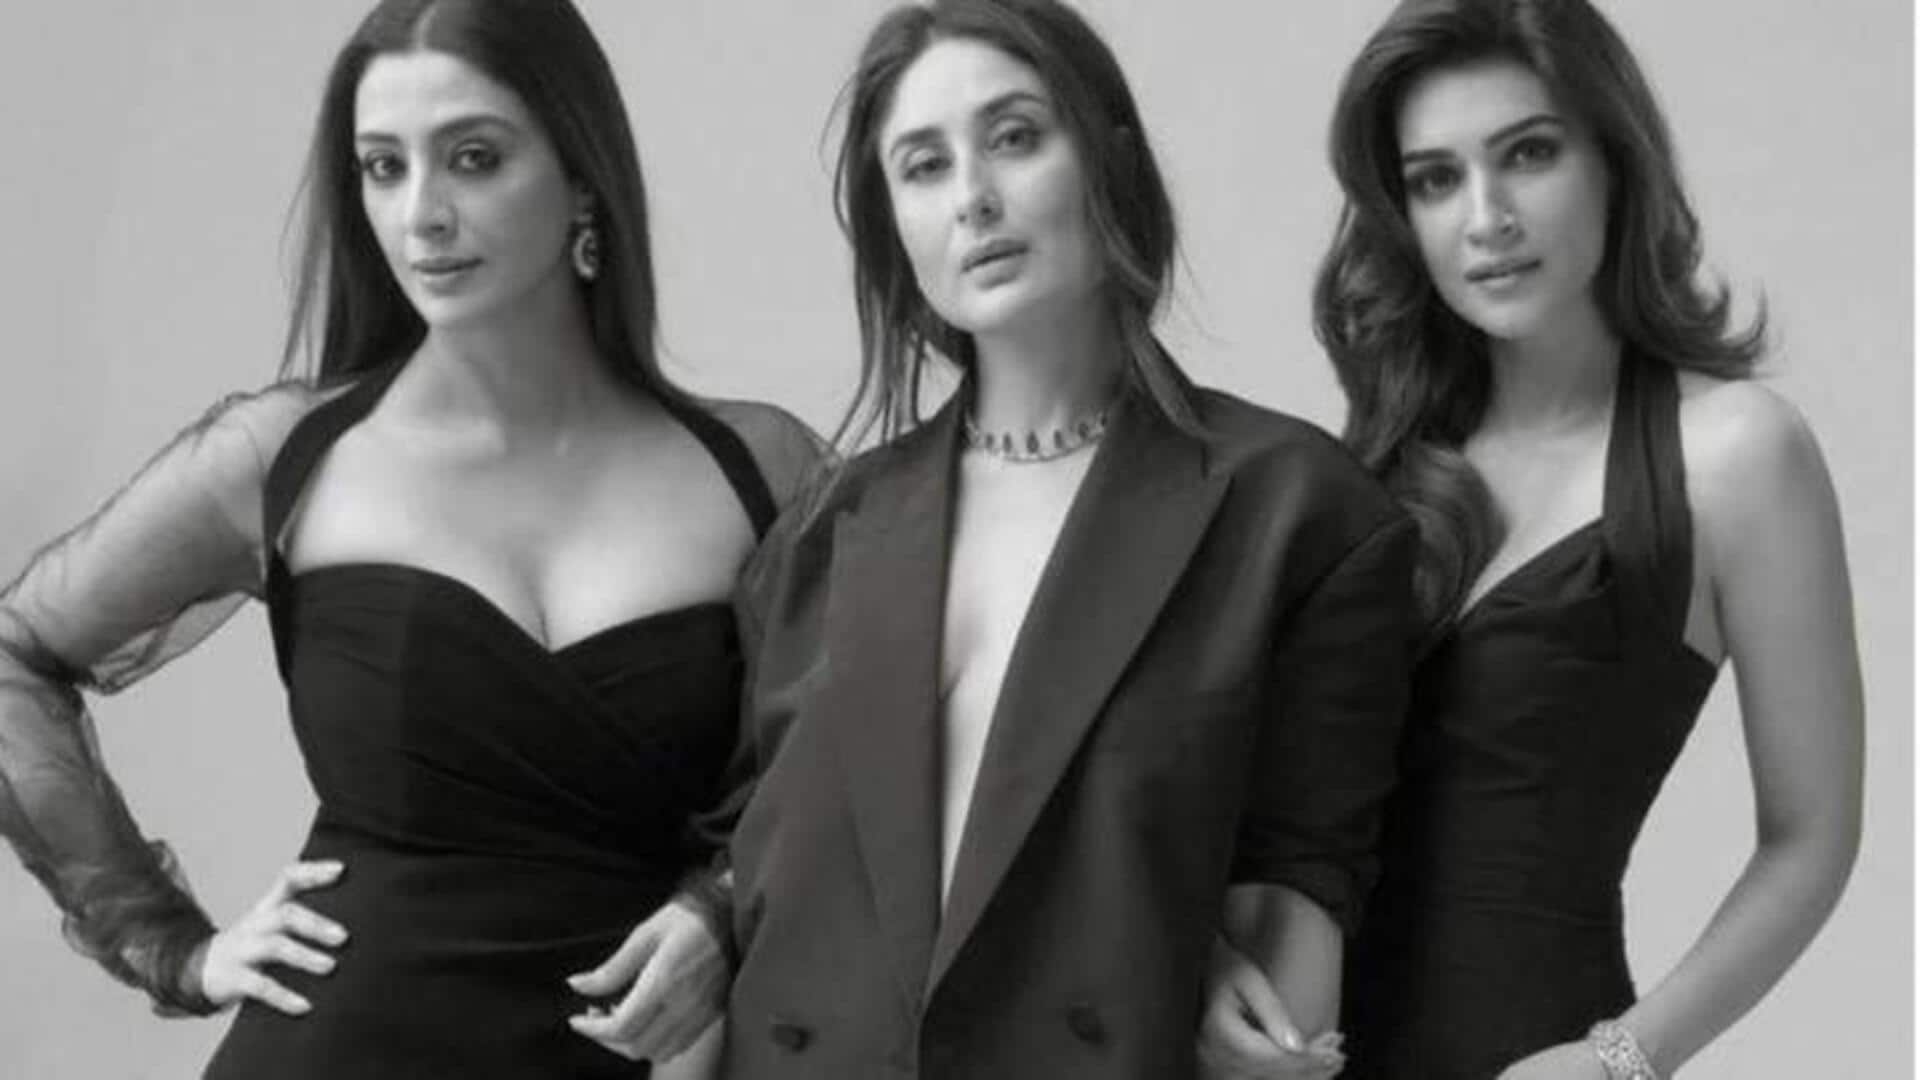 'The Crew': Kareena-Tabu-Kriti's film scheduled for release on March 29